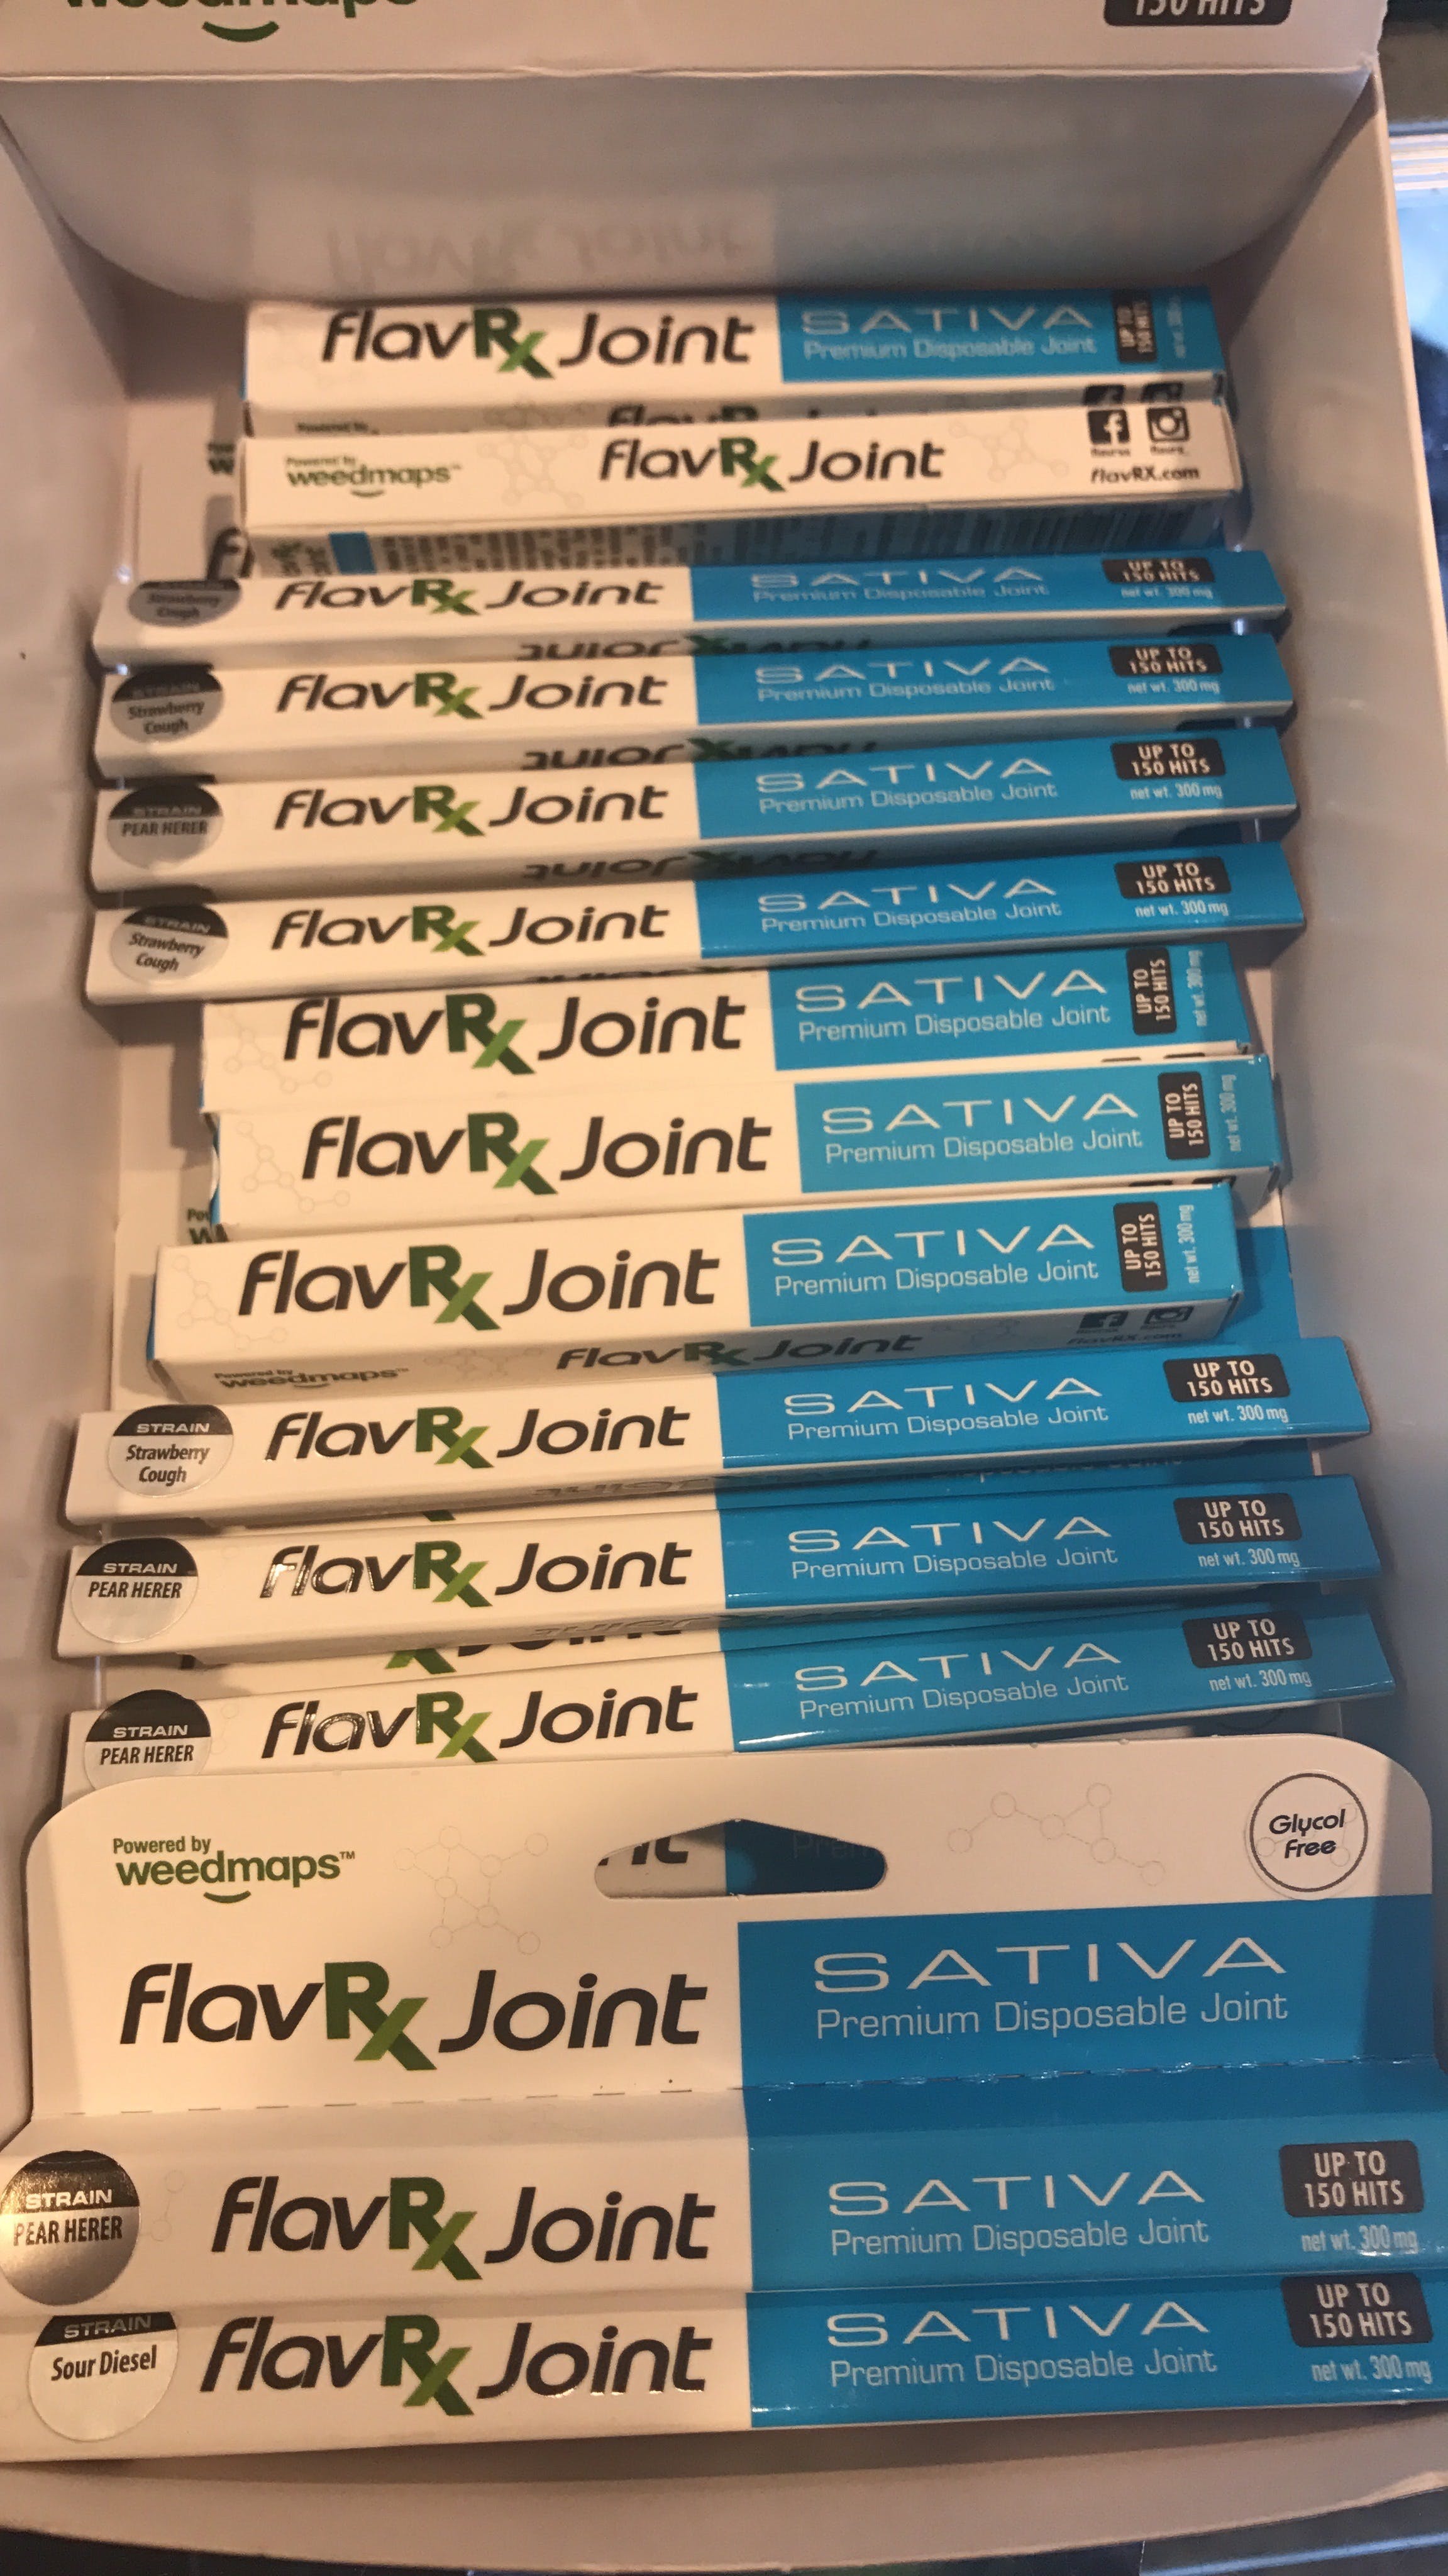 concentrate-sativa-premium-disposable-joint